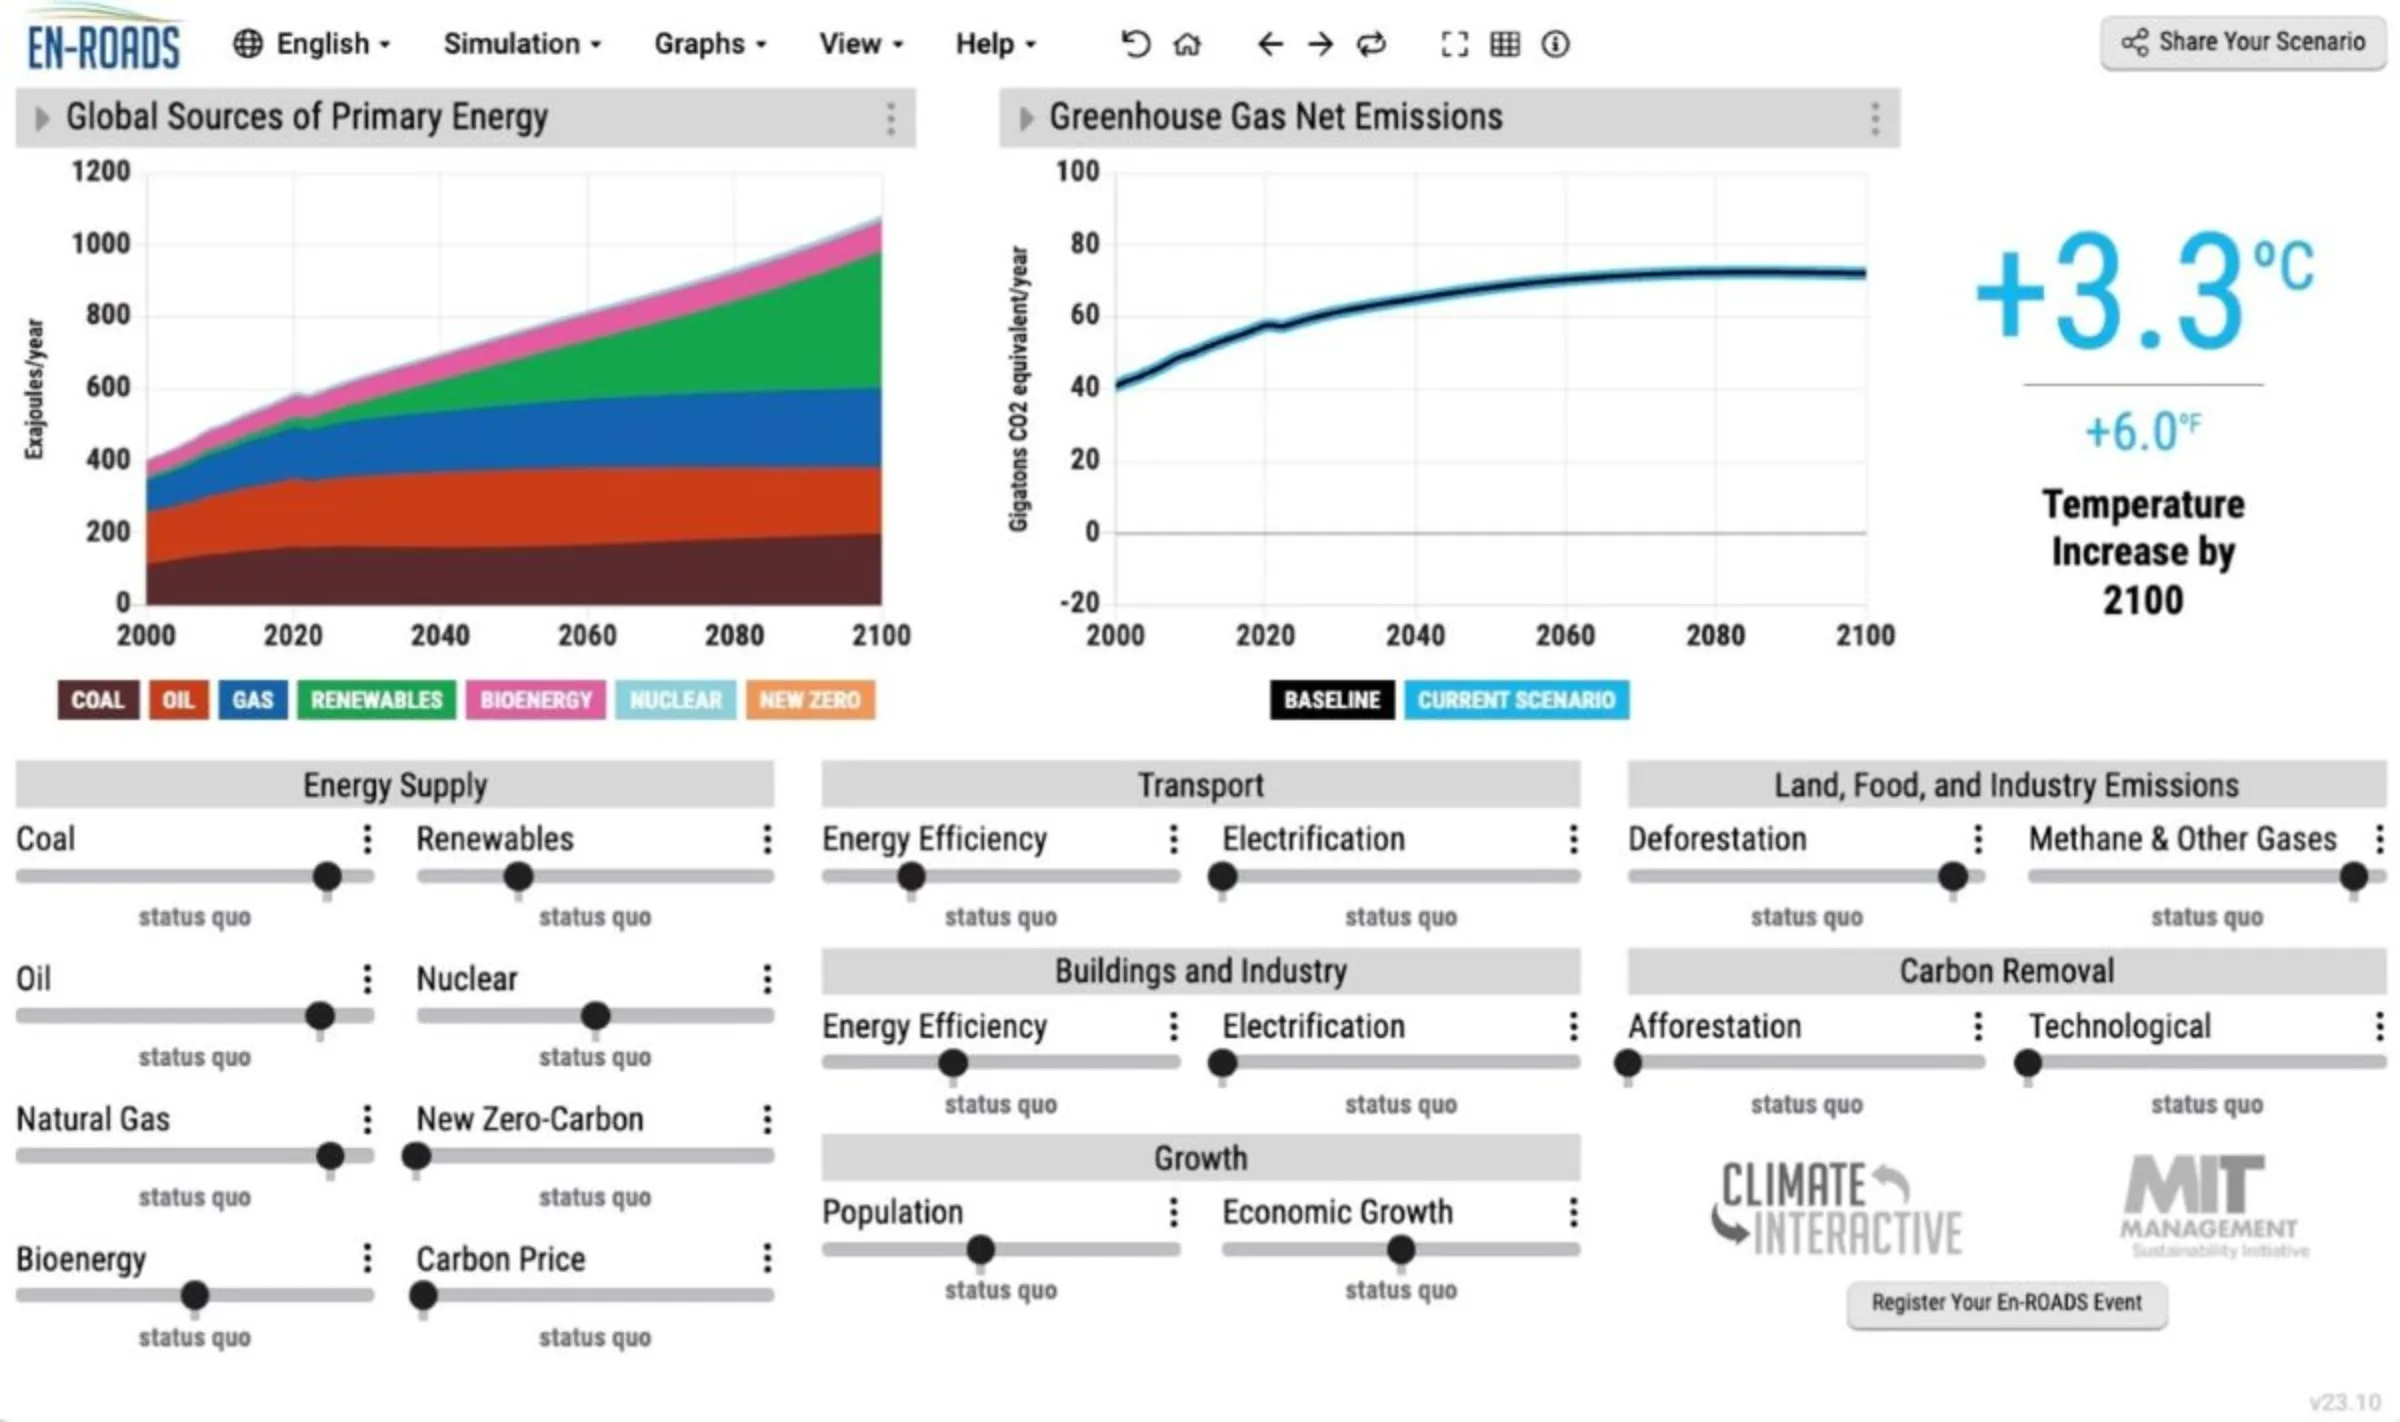 The En-ROADS Climate Solutions Simulator. Climate Interactive and MIT Sloan Sustainability Initiative/Handout via Thomson Reuters Foundation